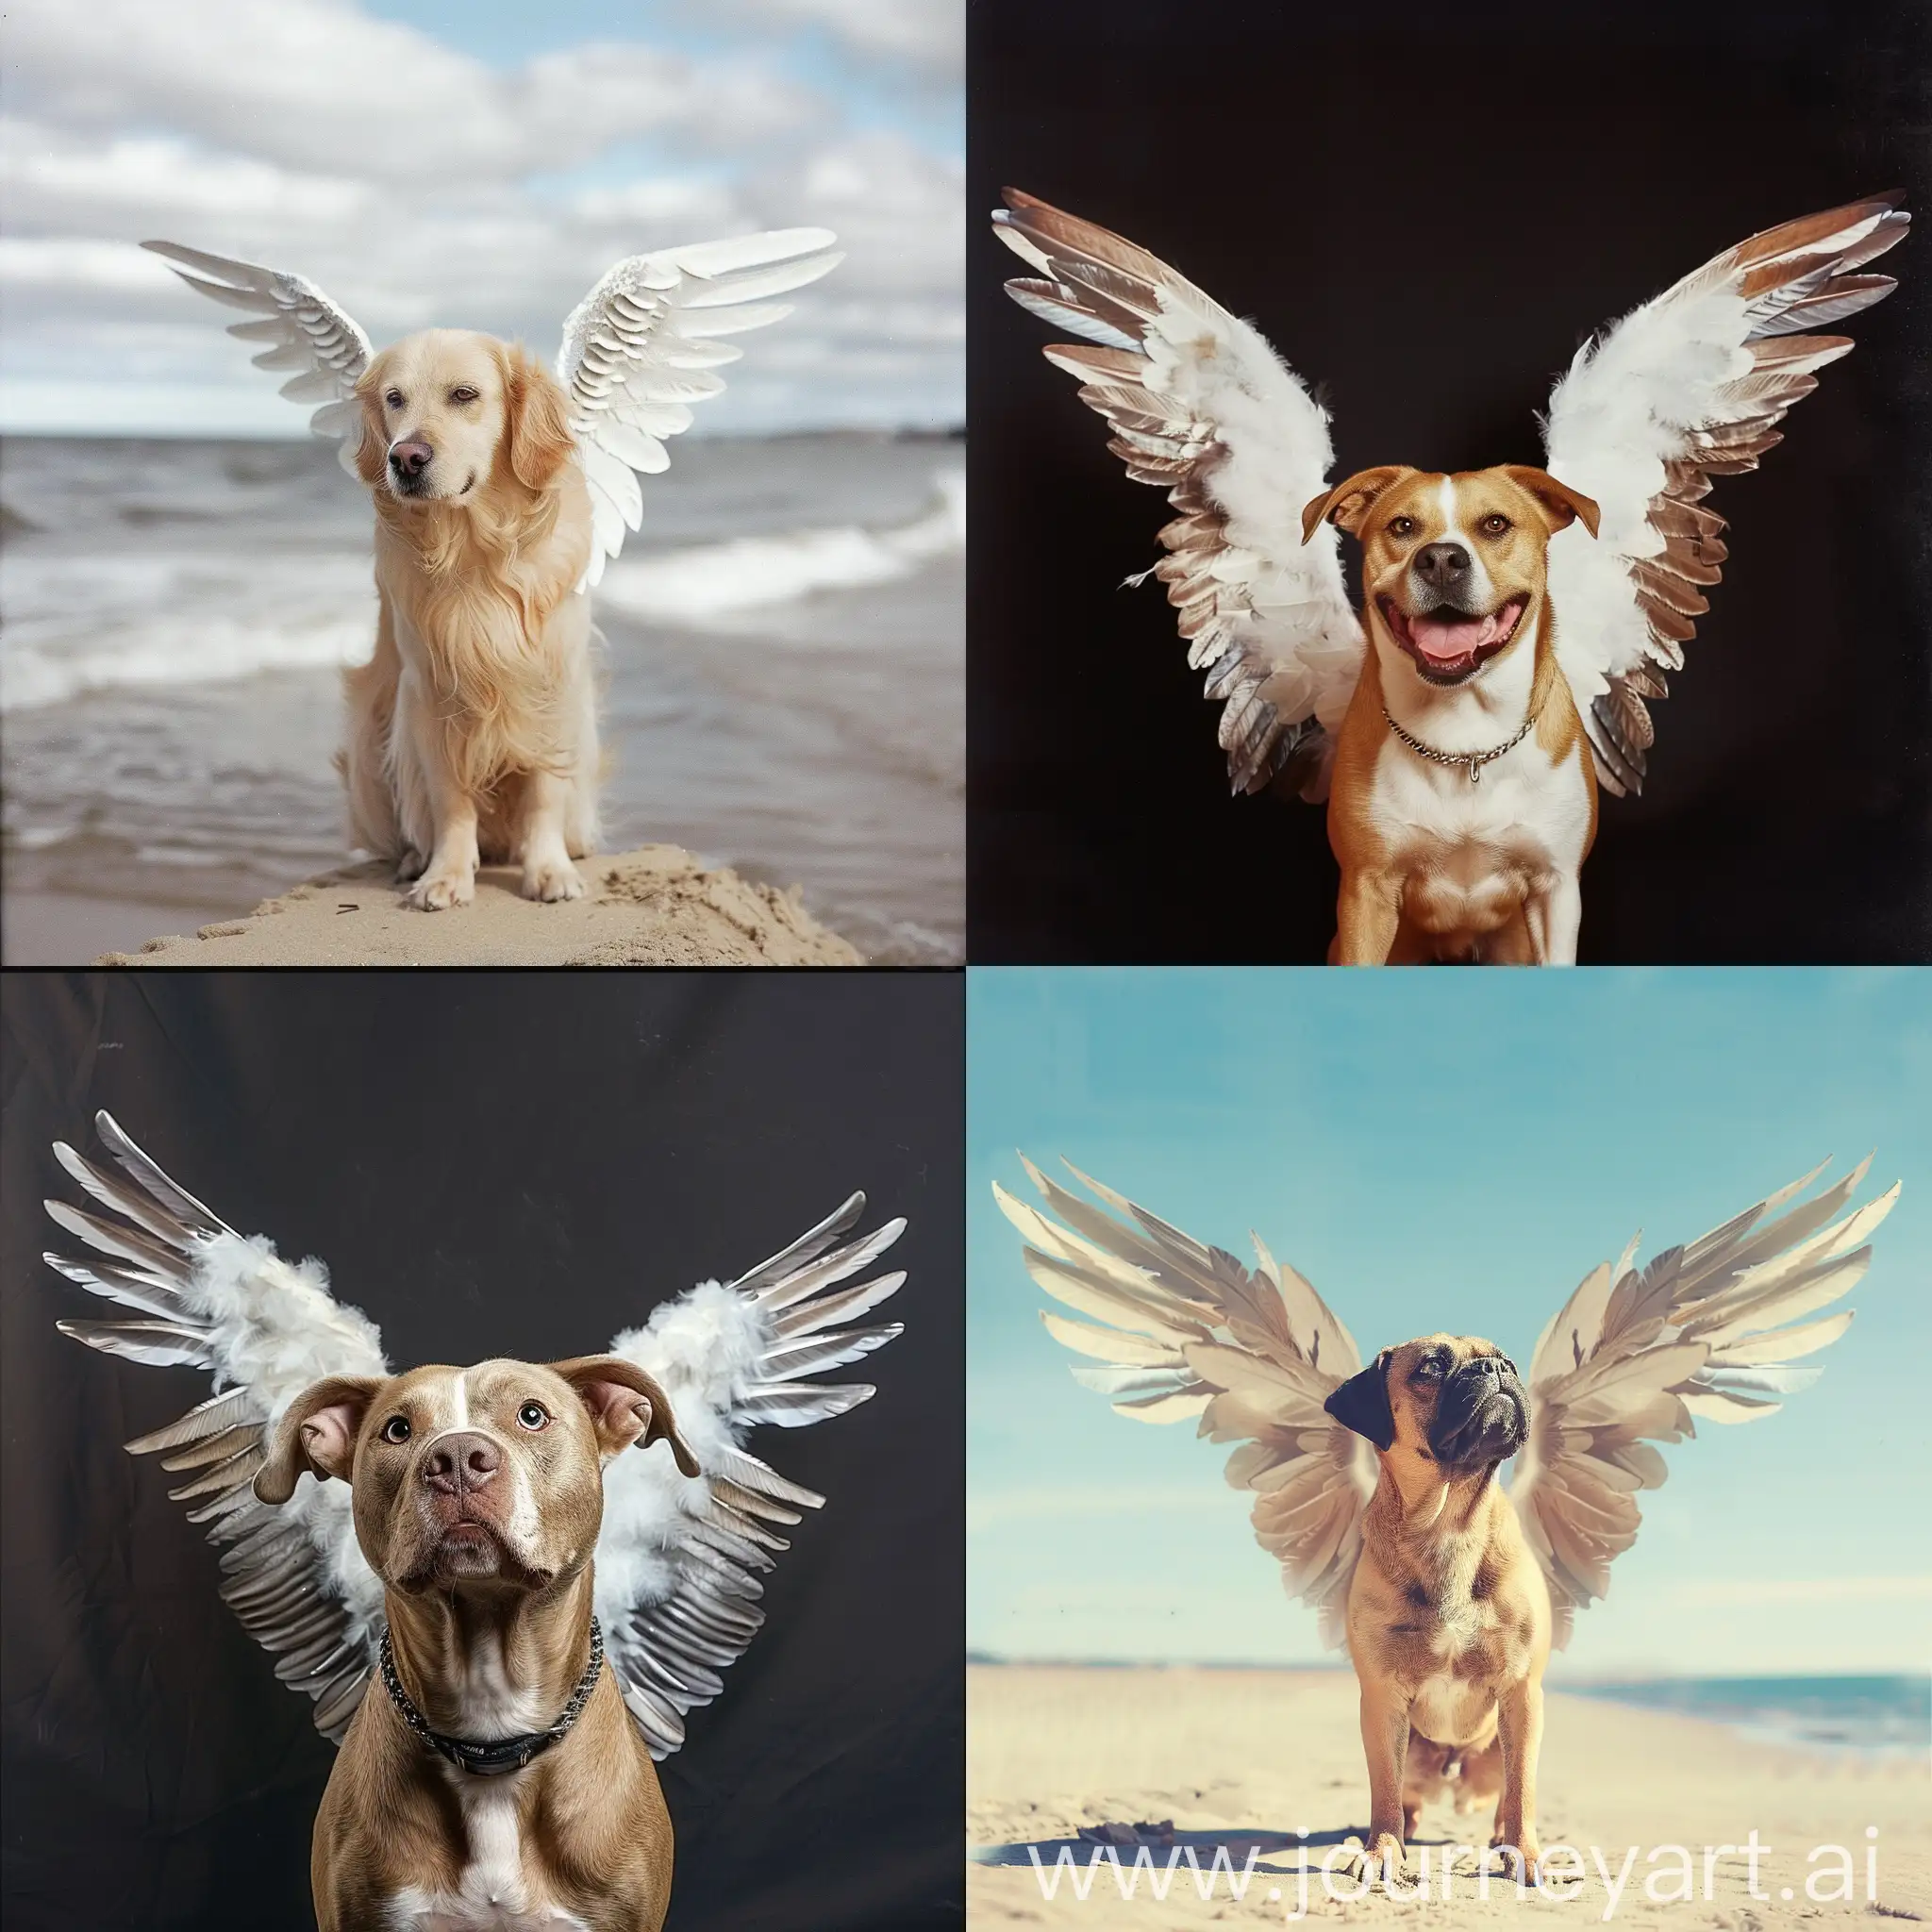 Majestic-Flying-Canine-Enigmatic-Creature-with-Angelic-Wings